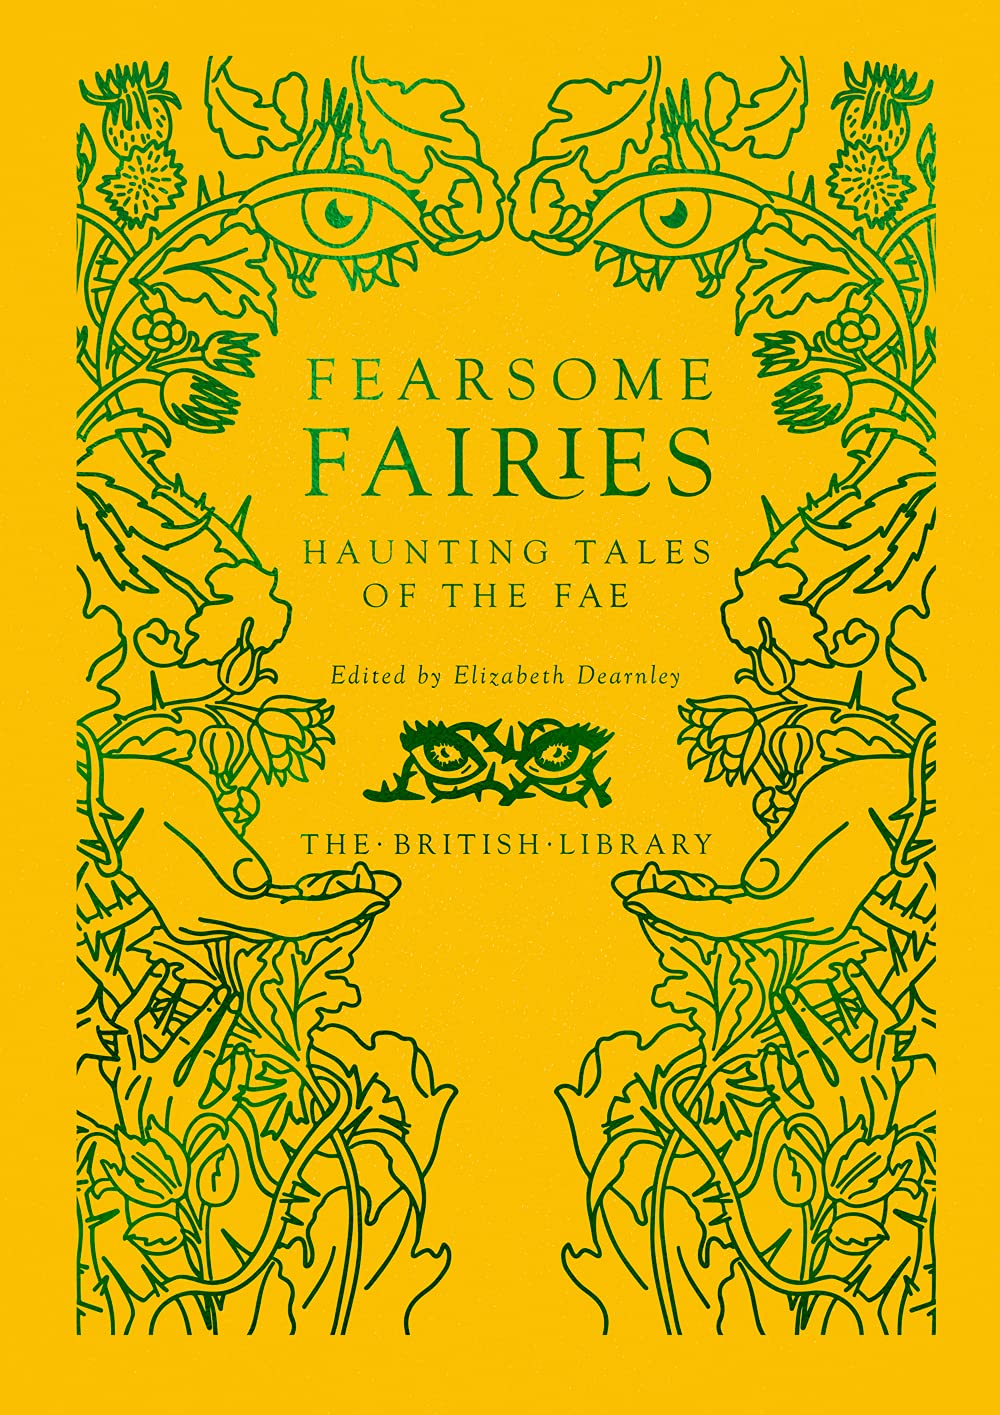 Fearsome Fairies: Haunting Tales of the Fae